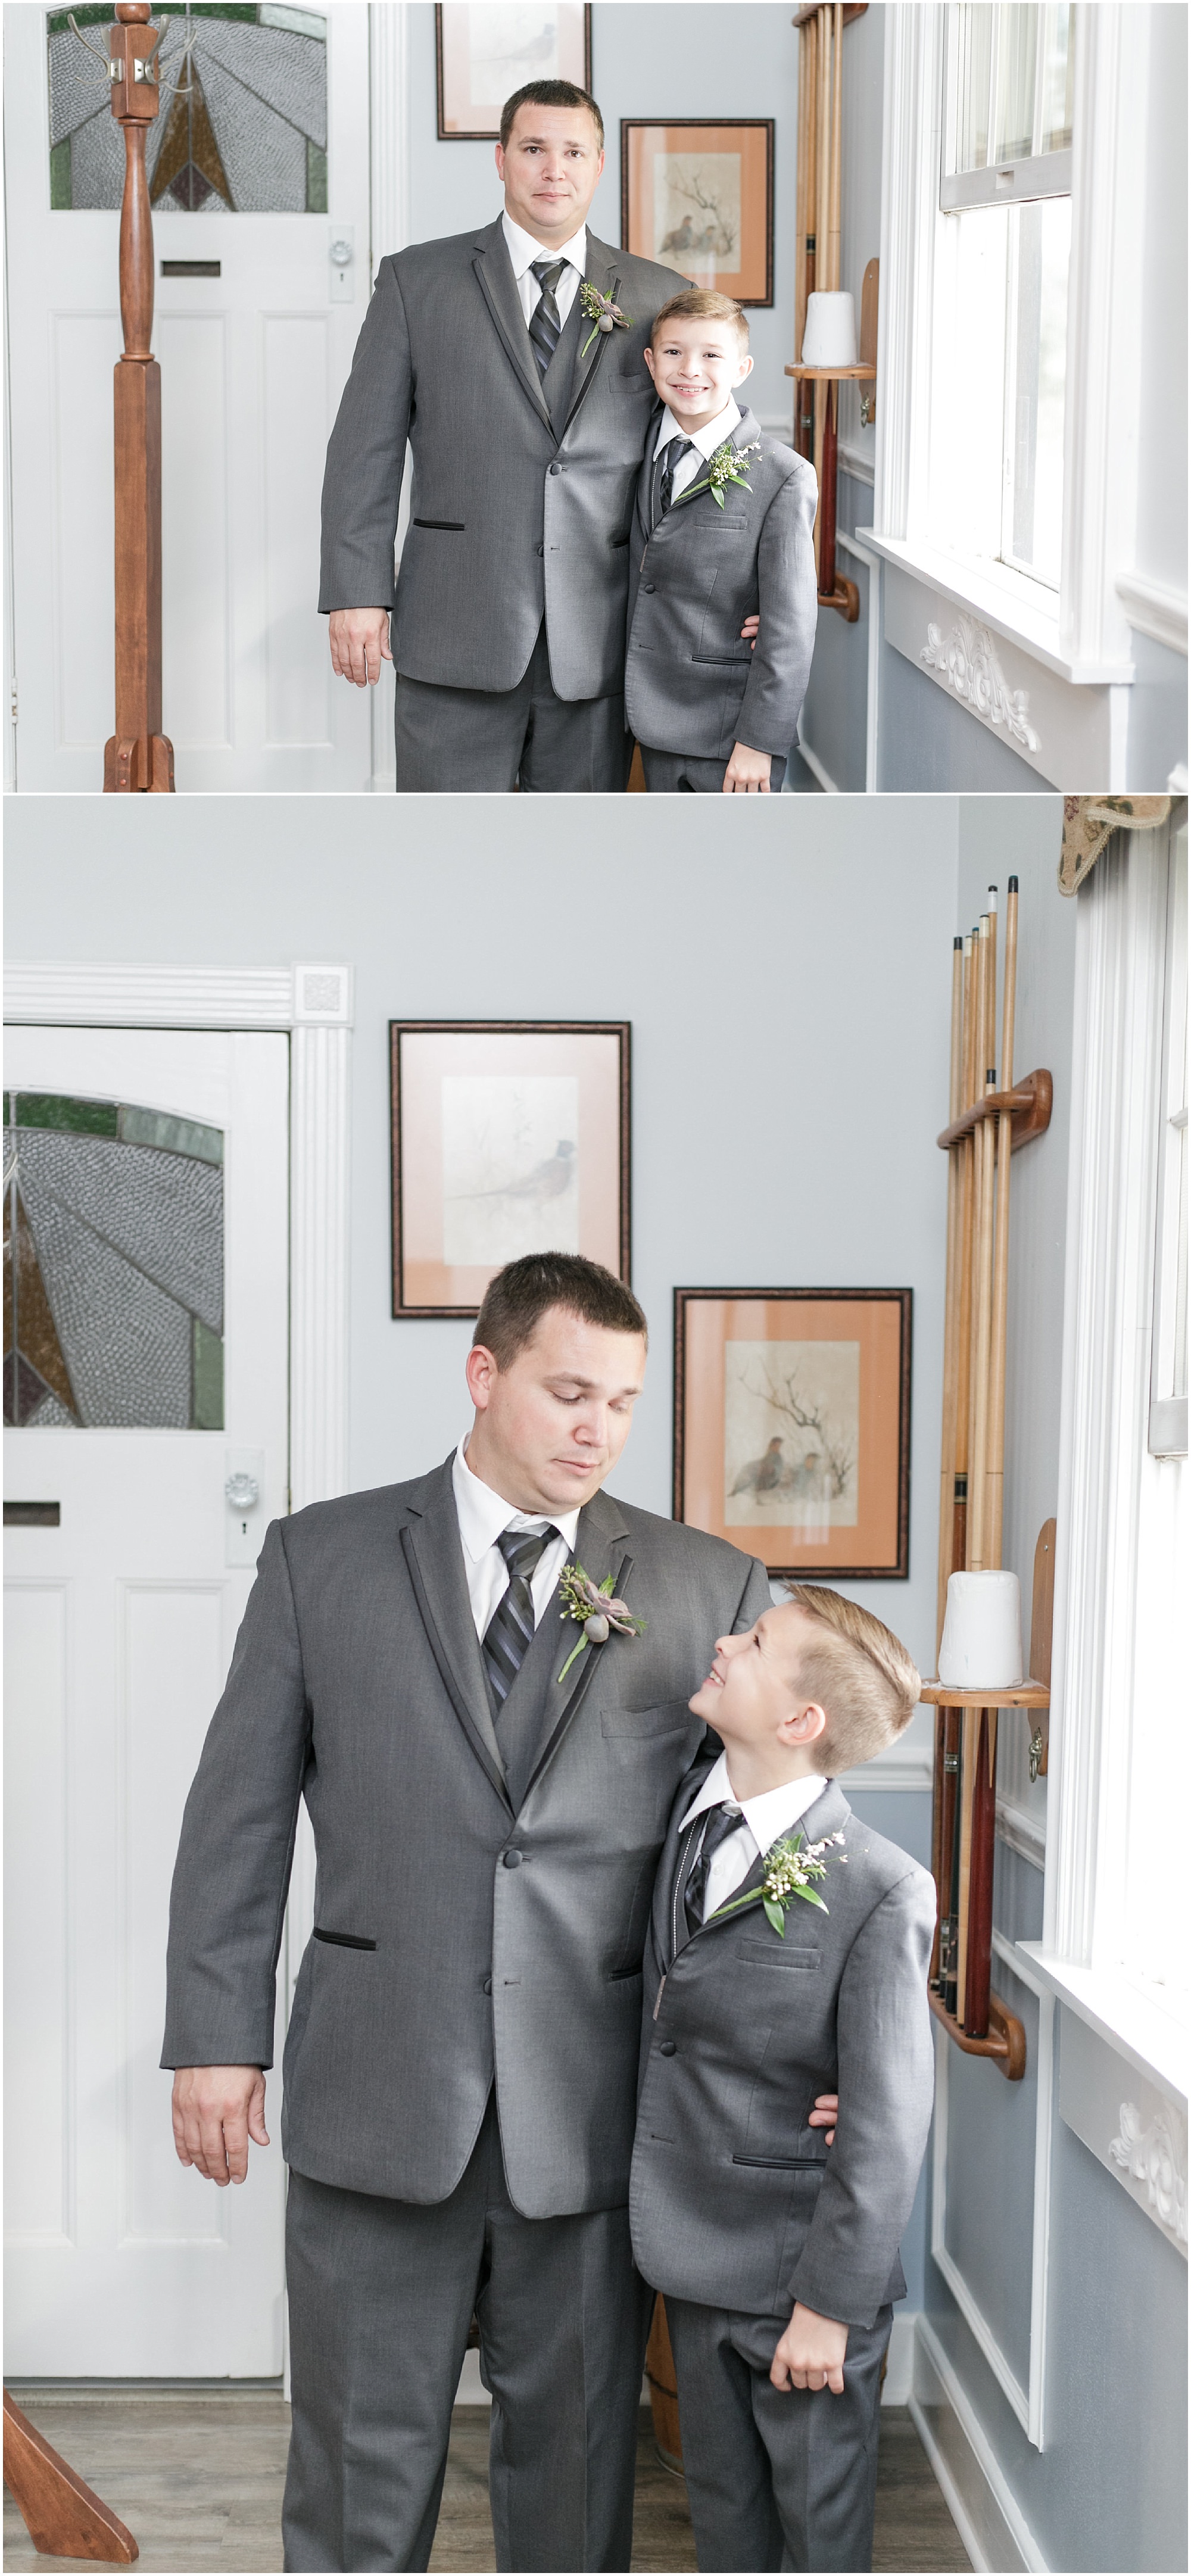 The groom and his son all dressed up for the wedding. 